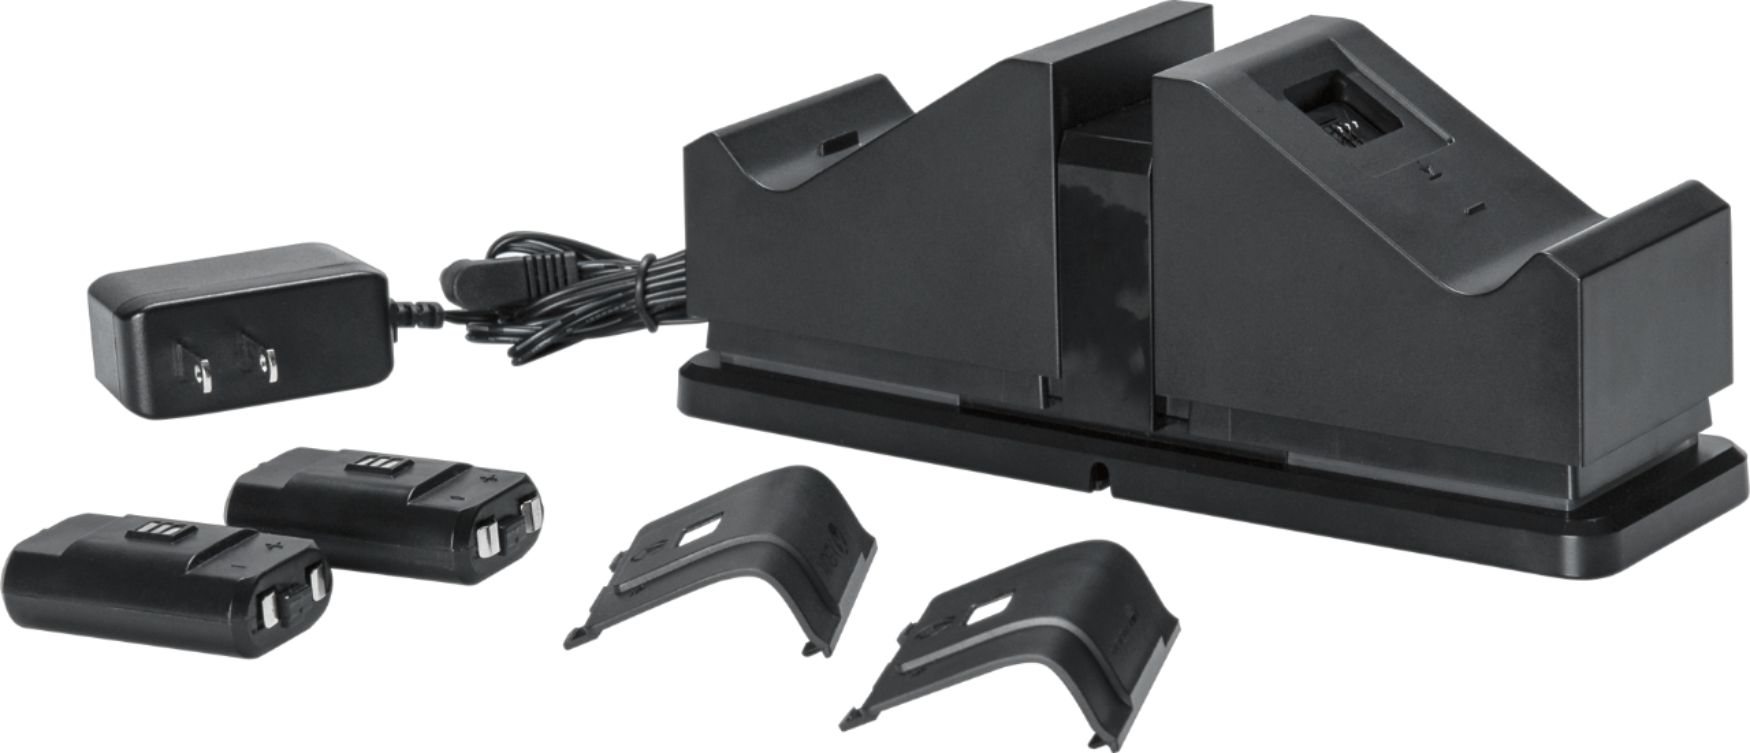 power a charging station xbox one